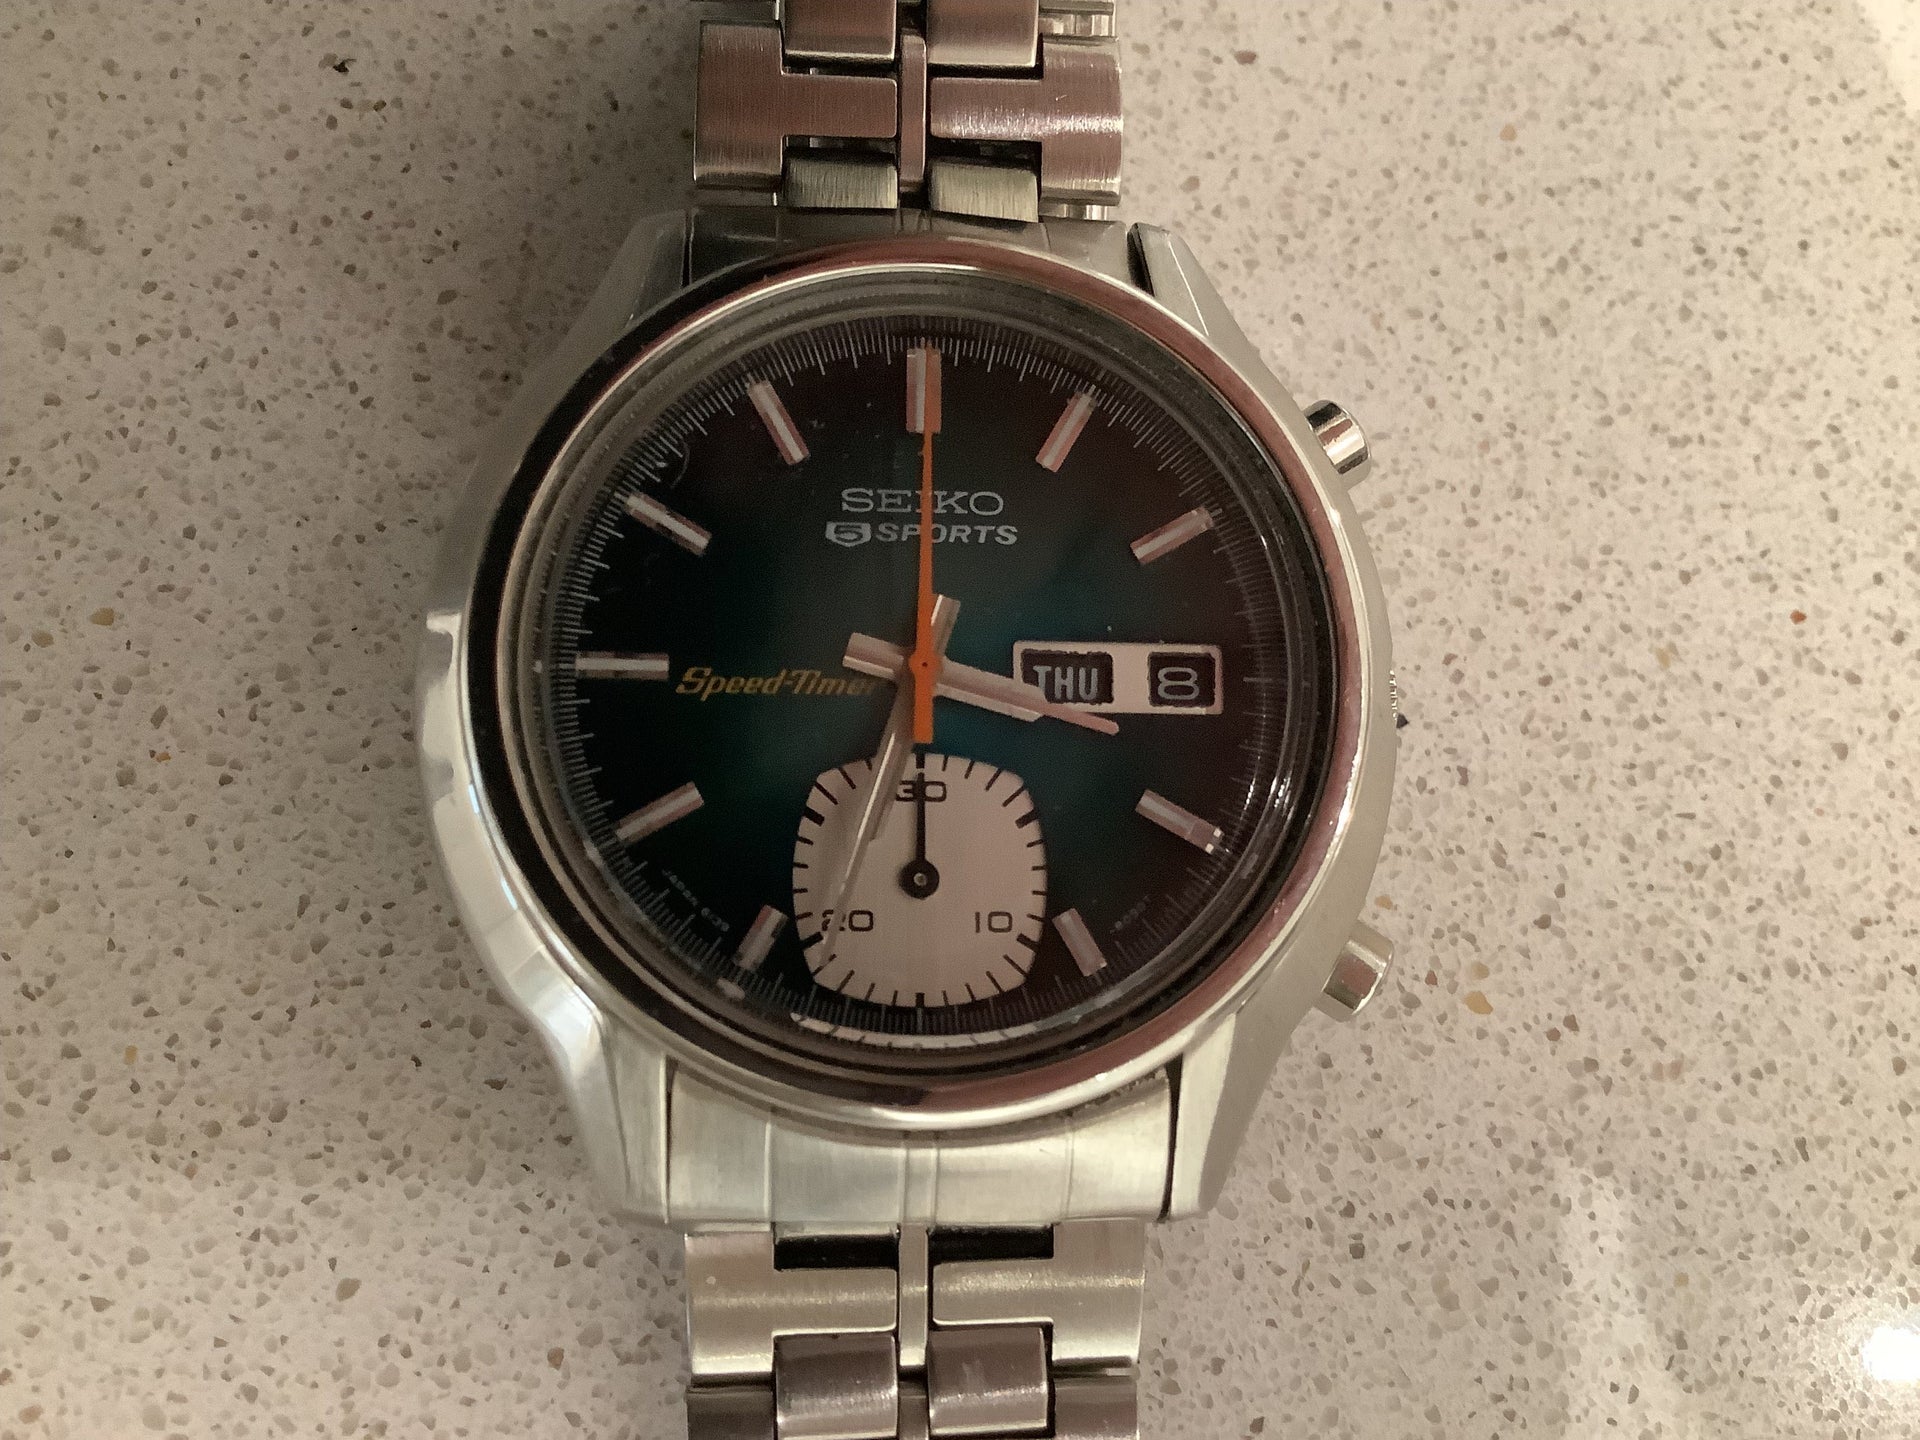 Seiko 6139-8050 for sale - £550 | The Watch Site